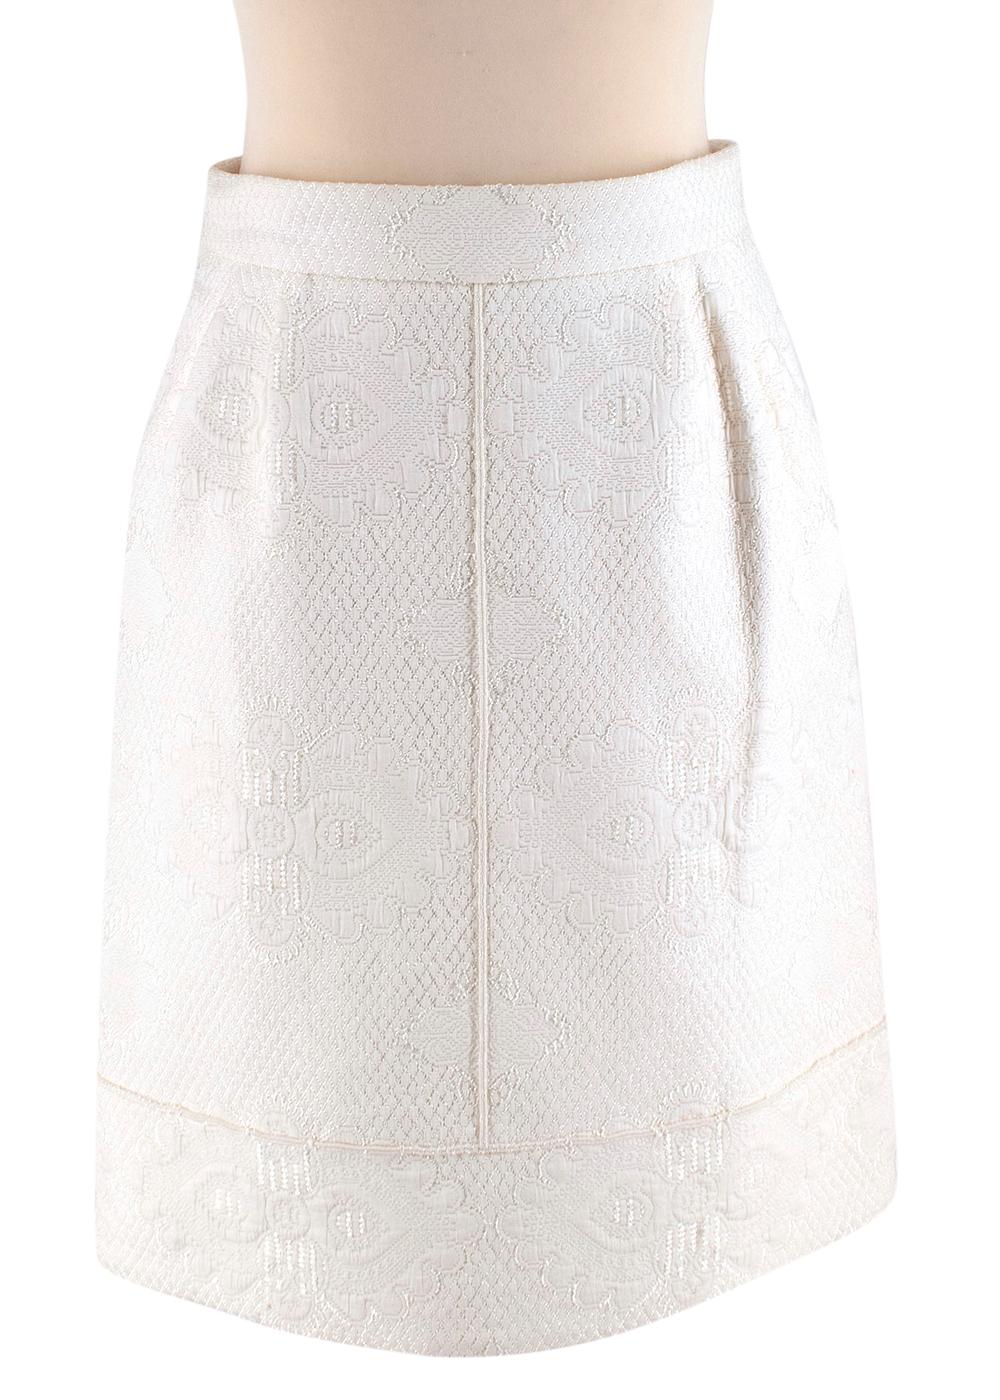 Louis Vuitton Cream Embroidered Jacquard Jacket & Skirt - Size US 0-2 4